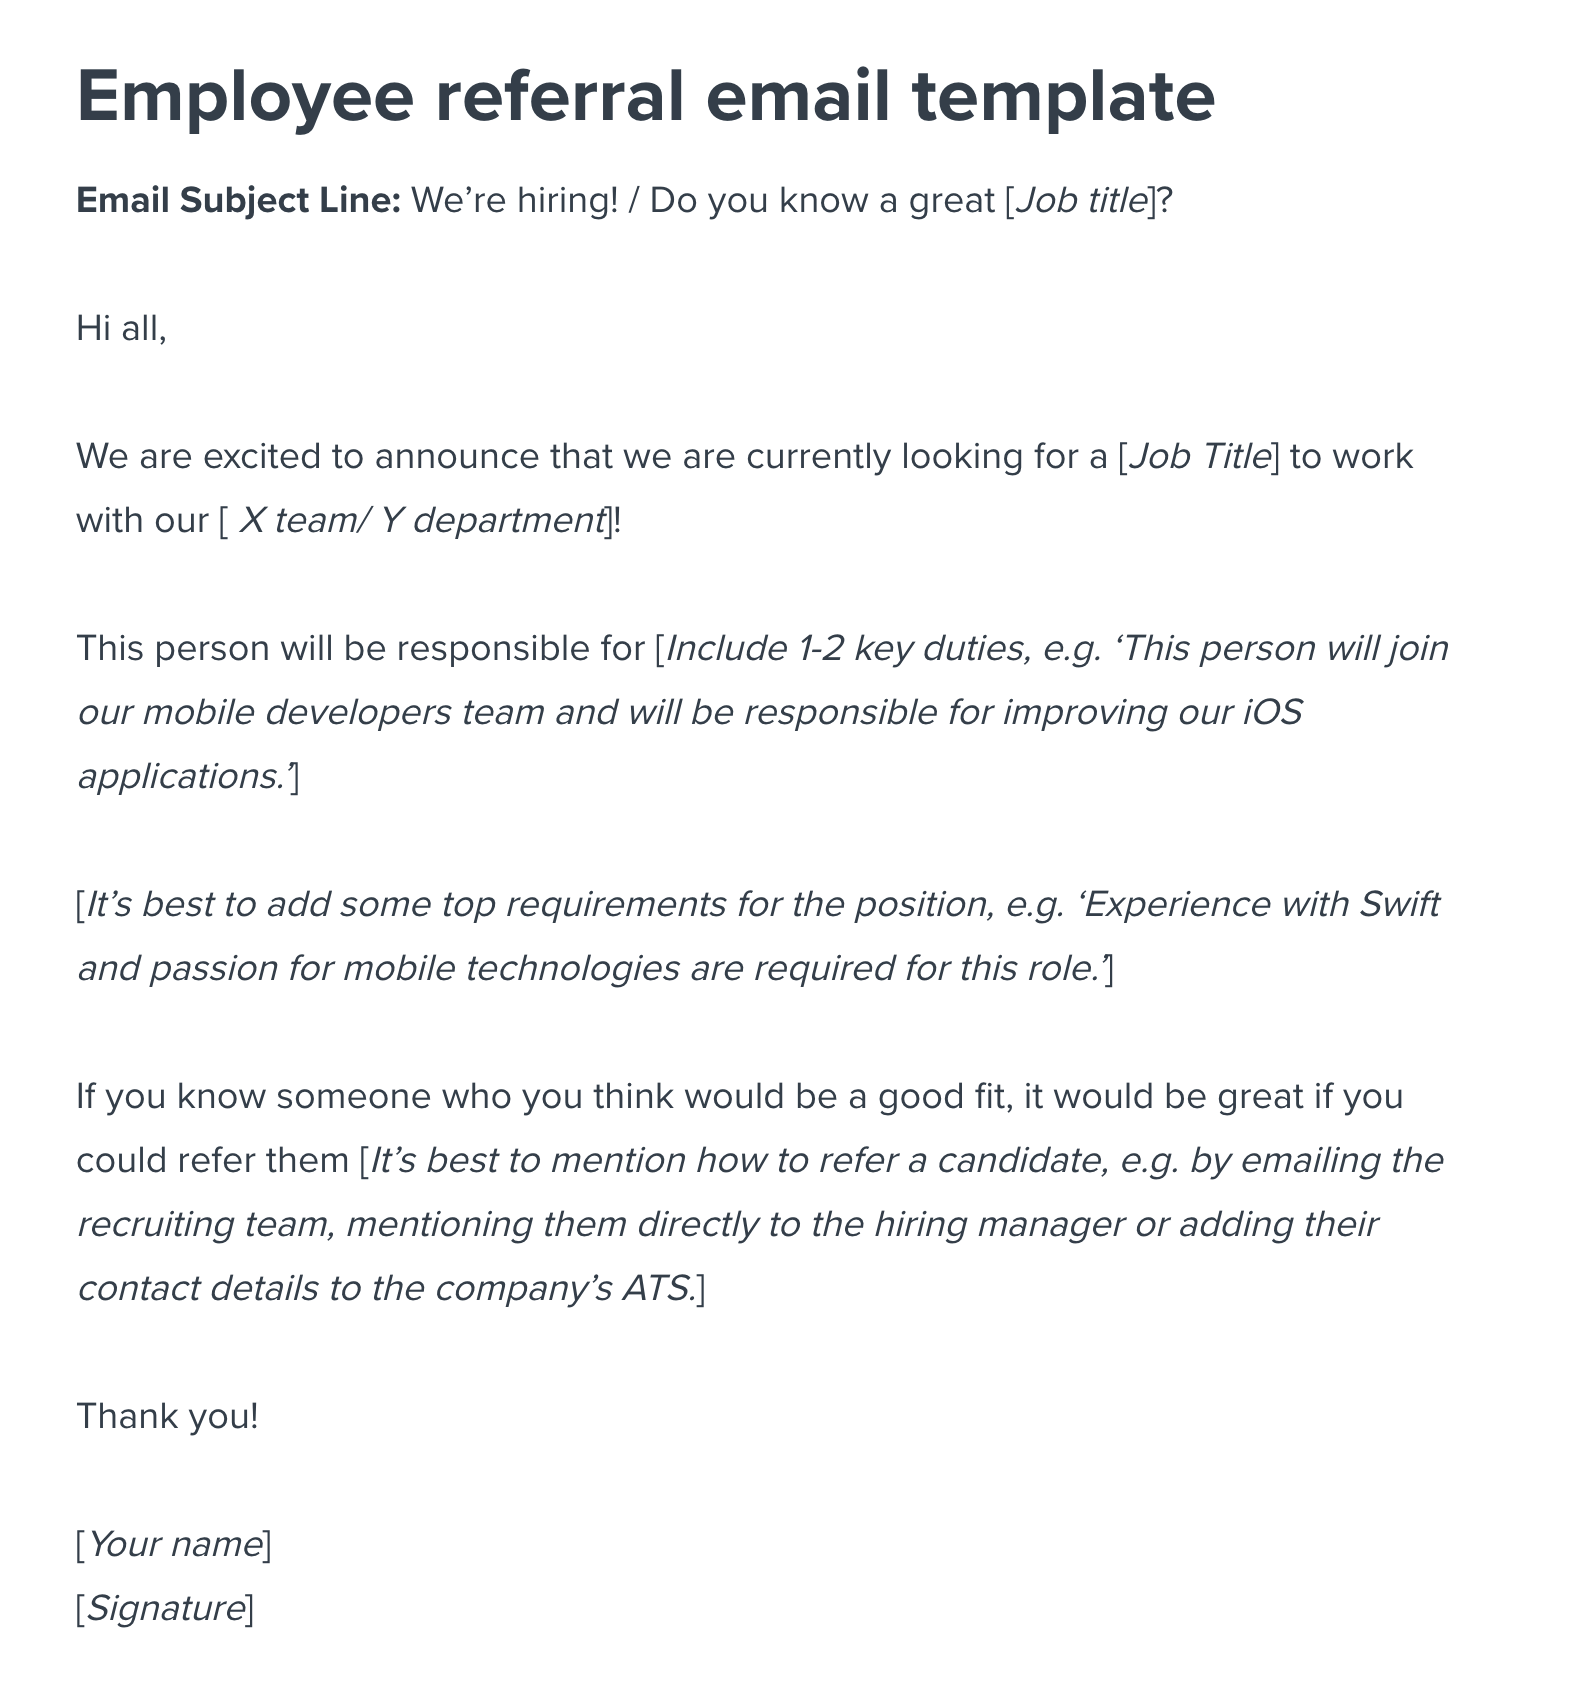 sending resume by email with referral